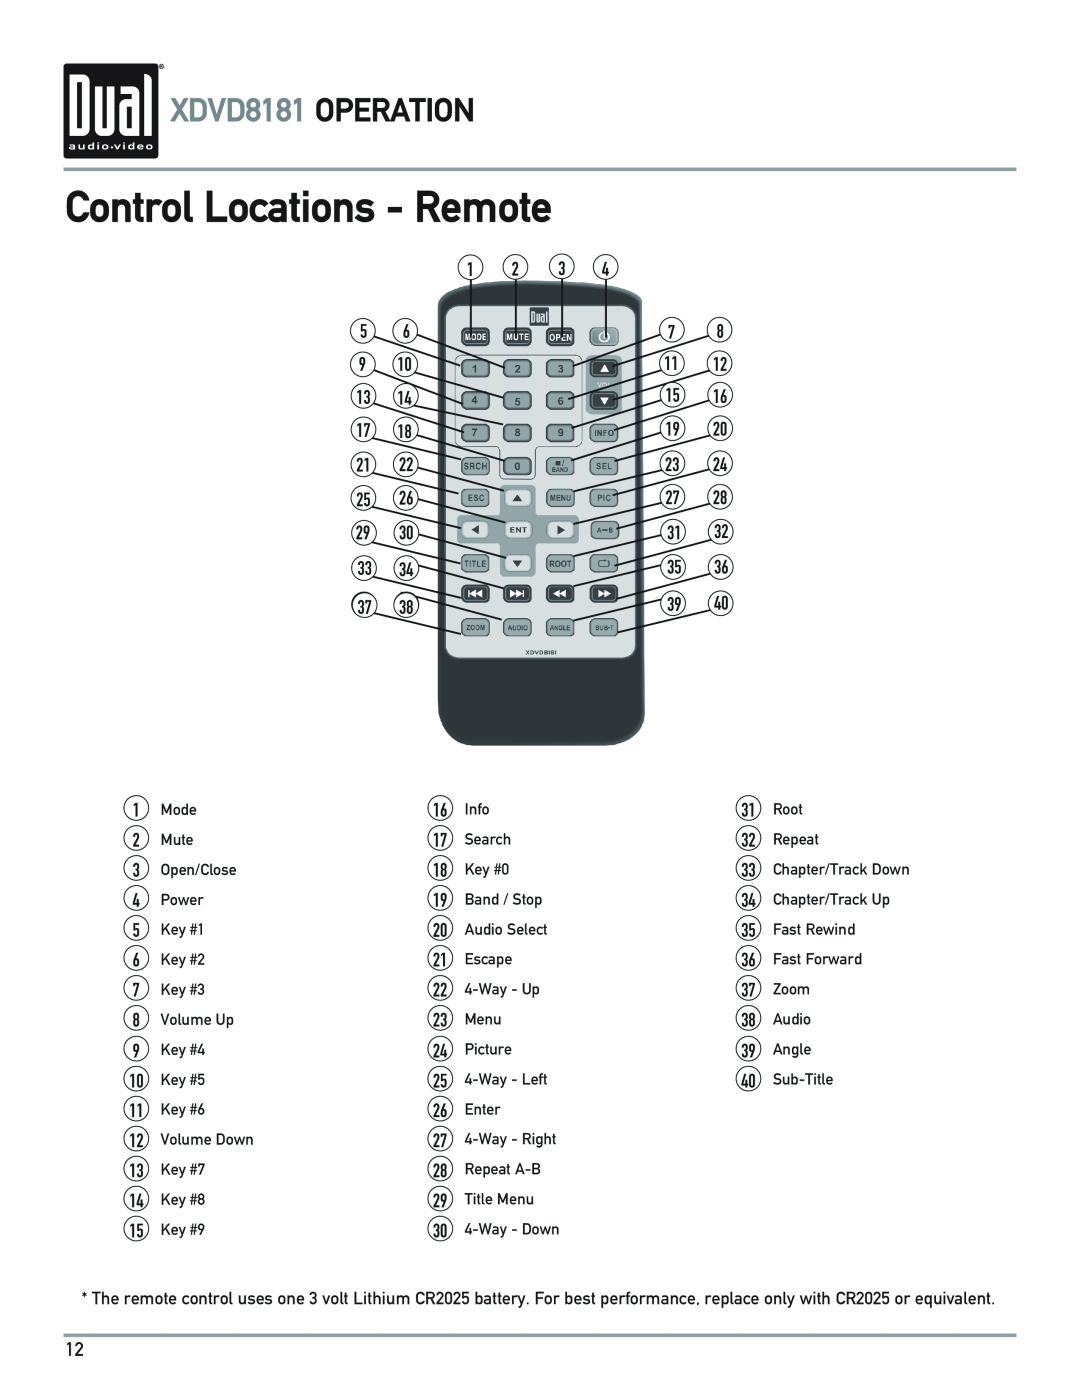 Dual owner manual Control Locations - Remote, XDVD8181 OPERATION 